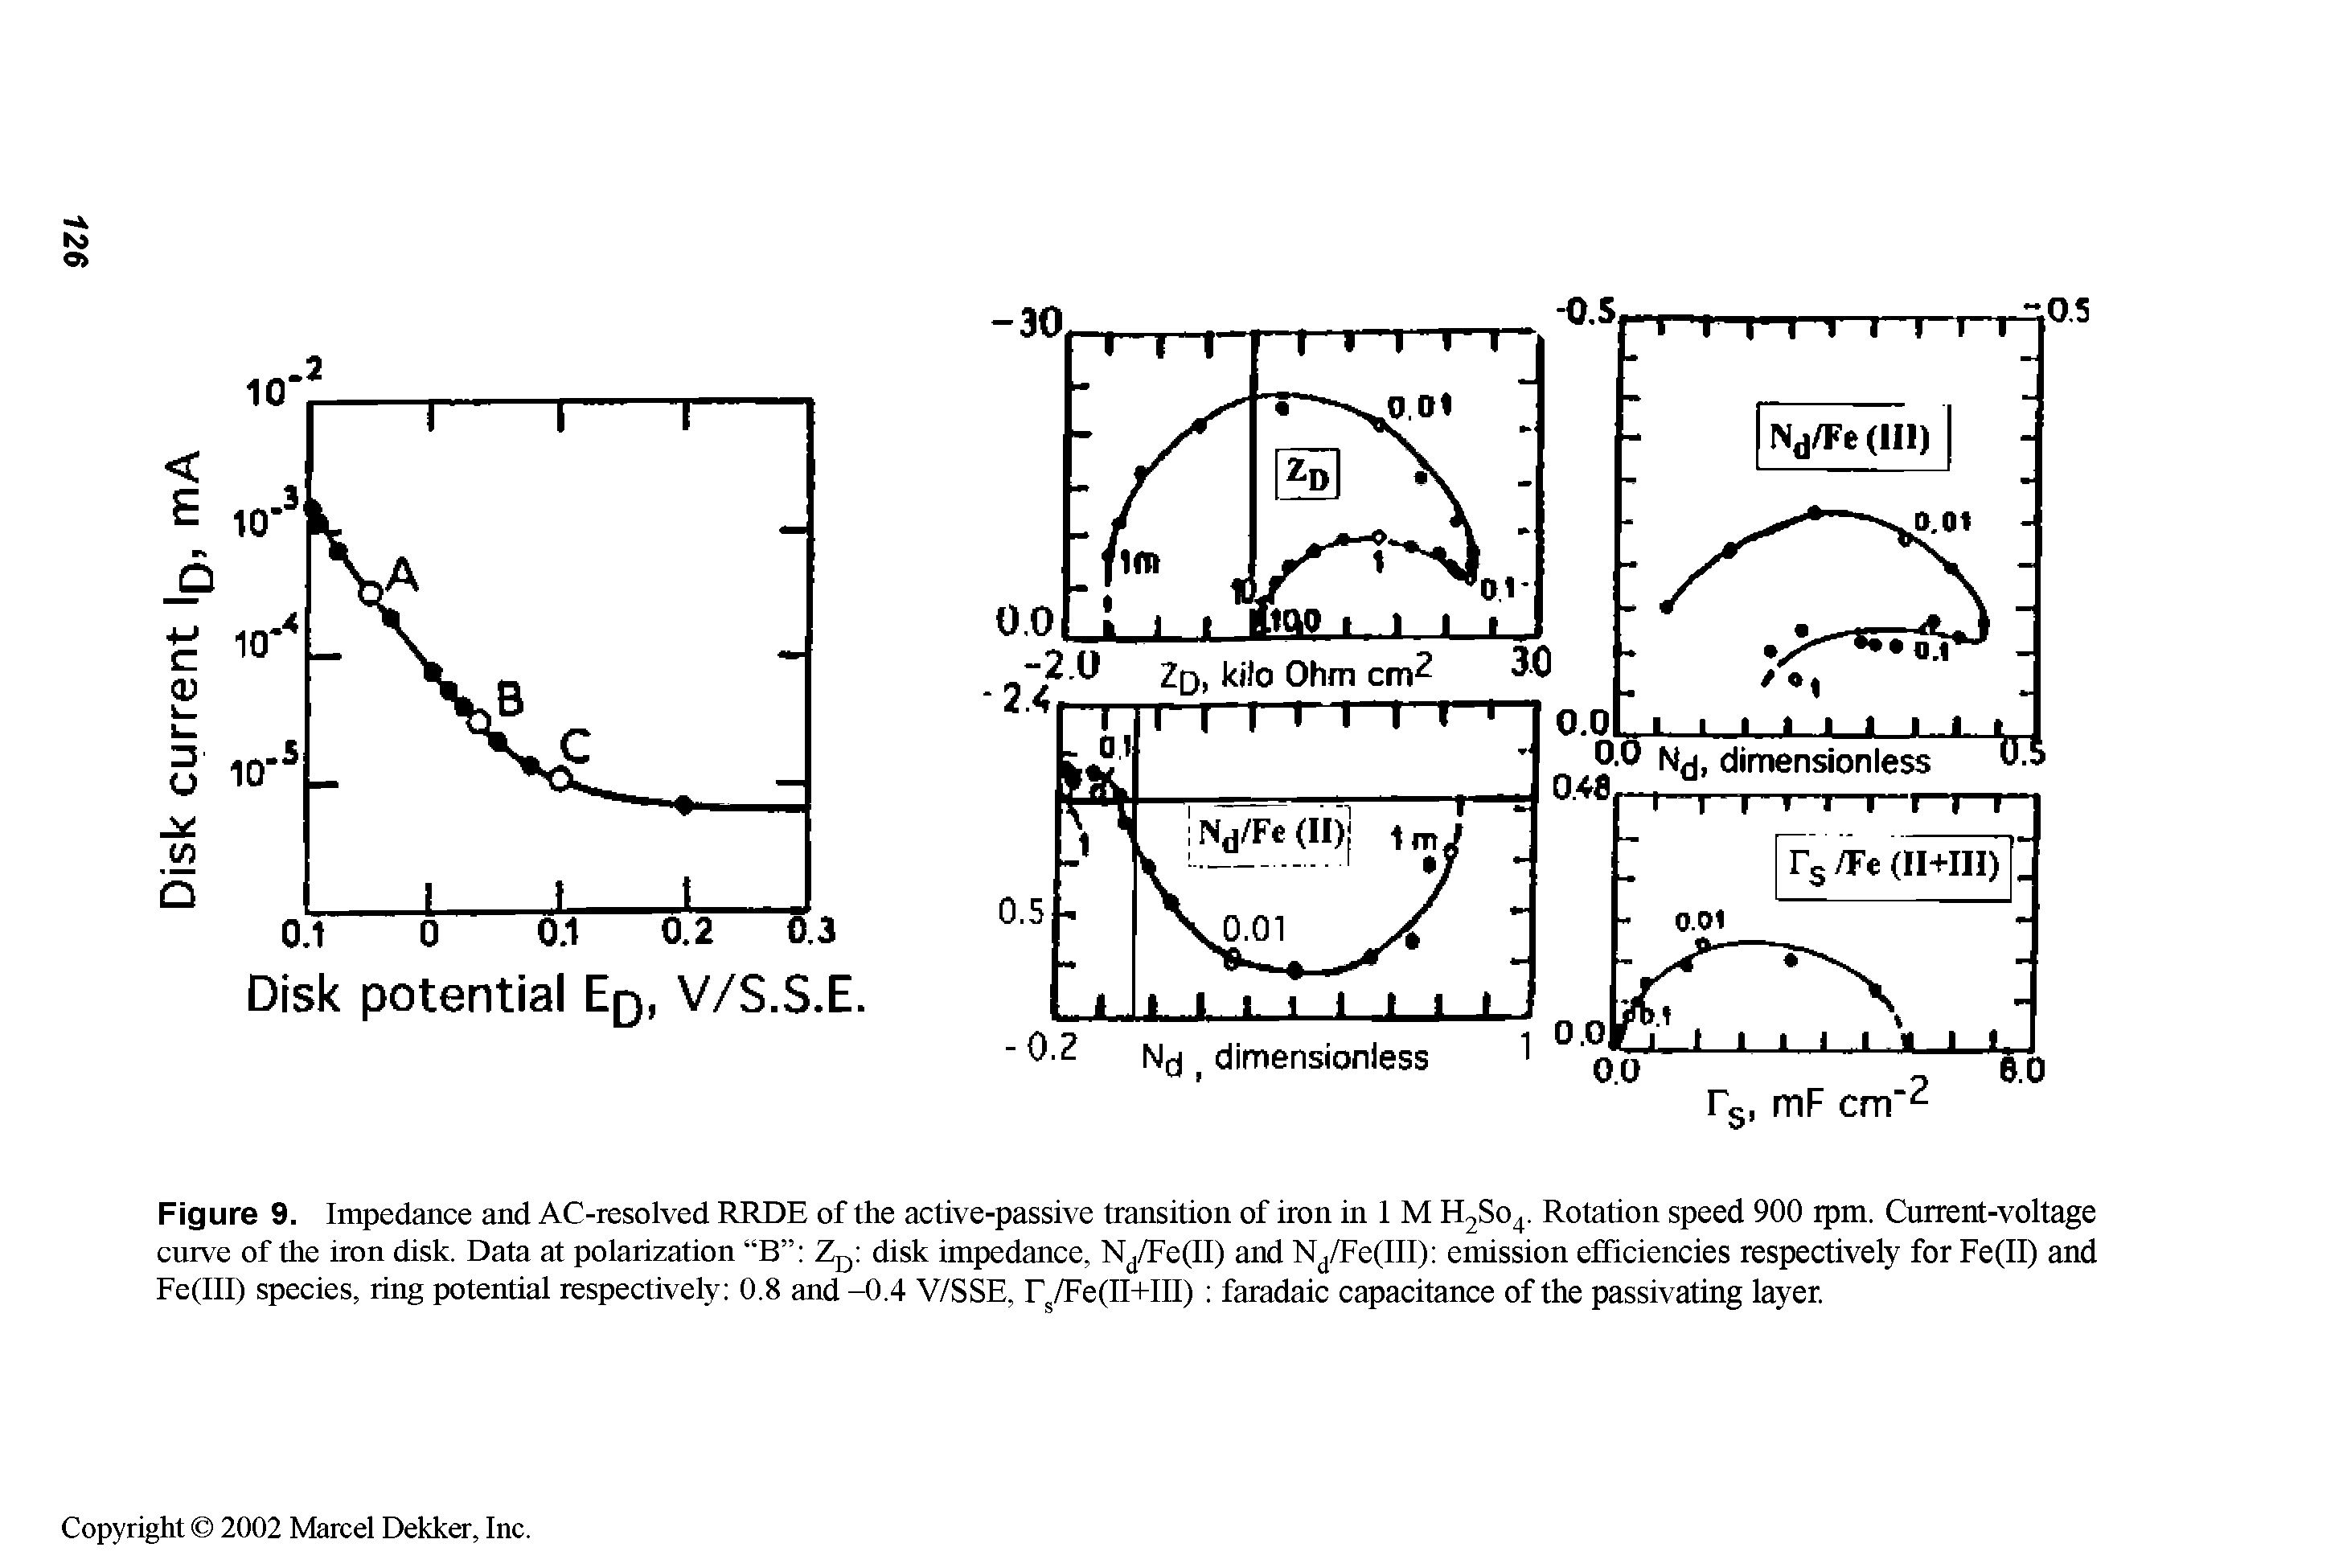 Figure 9. Impedance and AC-resolved RRDE of the active-passive transition of iron in 1 M HjSo. Rotation speed 900 rpm. Current-voltage curve of the iron disk. Data at polarization B Z disk impedance, Nj/Fe(II) and Nj/Fe(III) emission efficiencies respectively for Fe(II) and Fe(III) species, ring potential respectively 0.8 and -0.4 V/SSE, r /Fe(II+III) faradaic capacitance of the passivating layer.